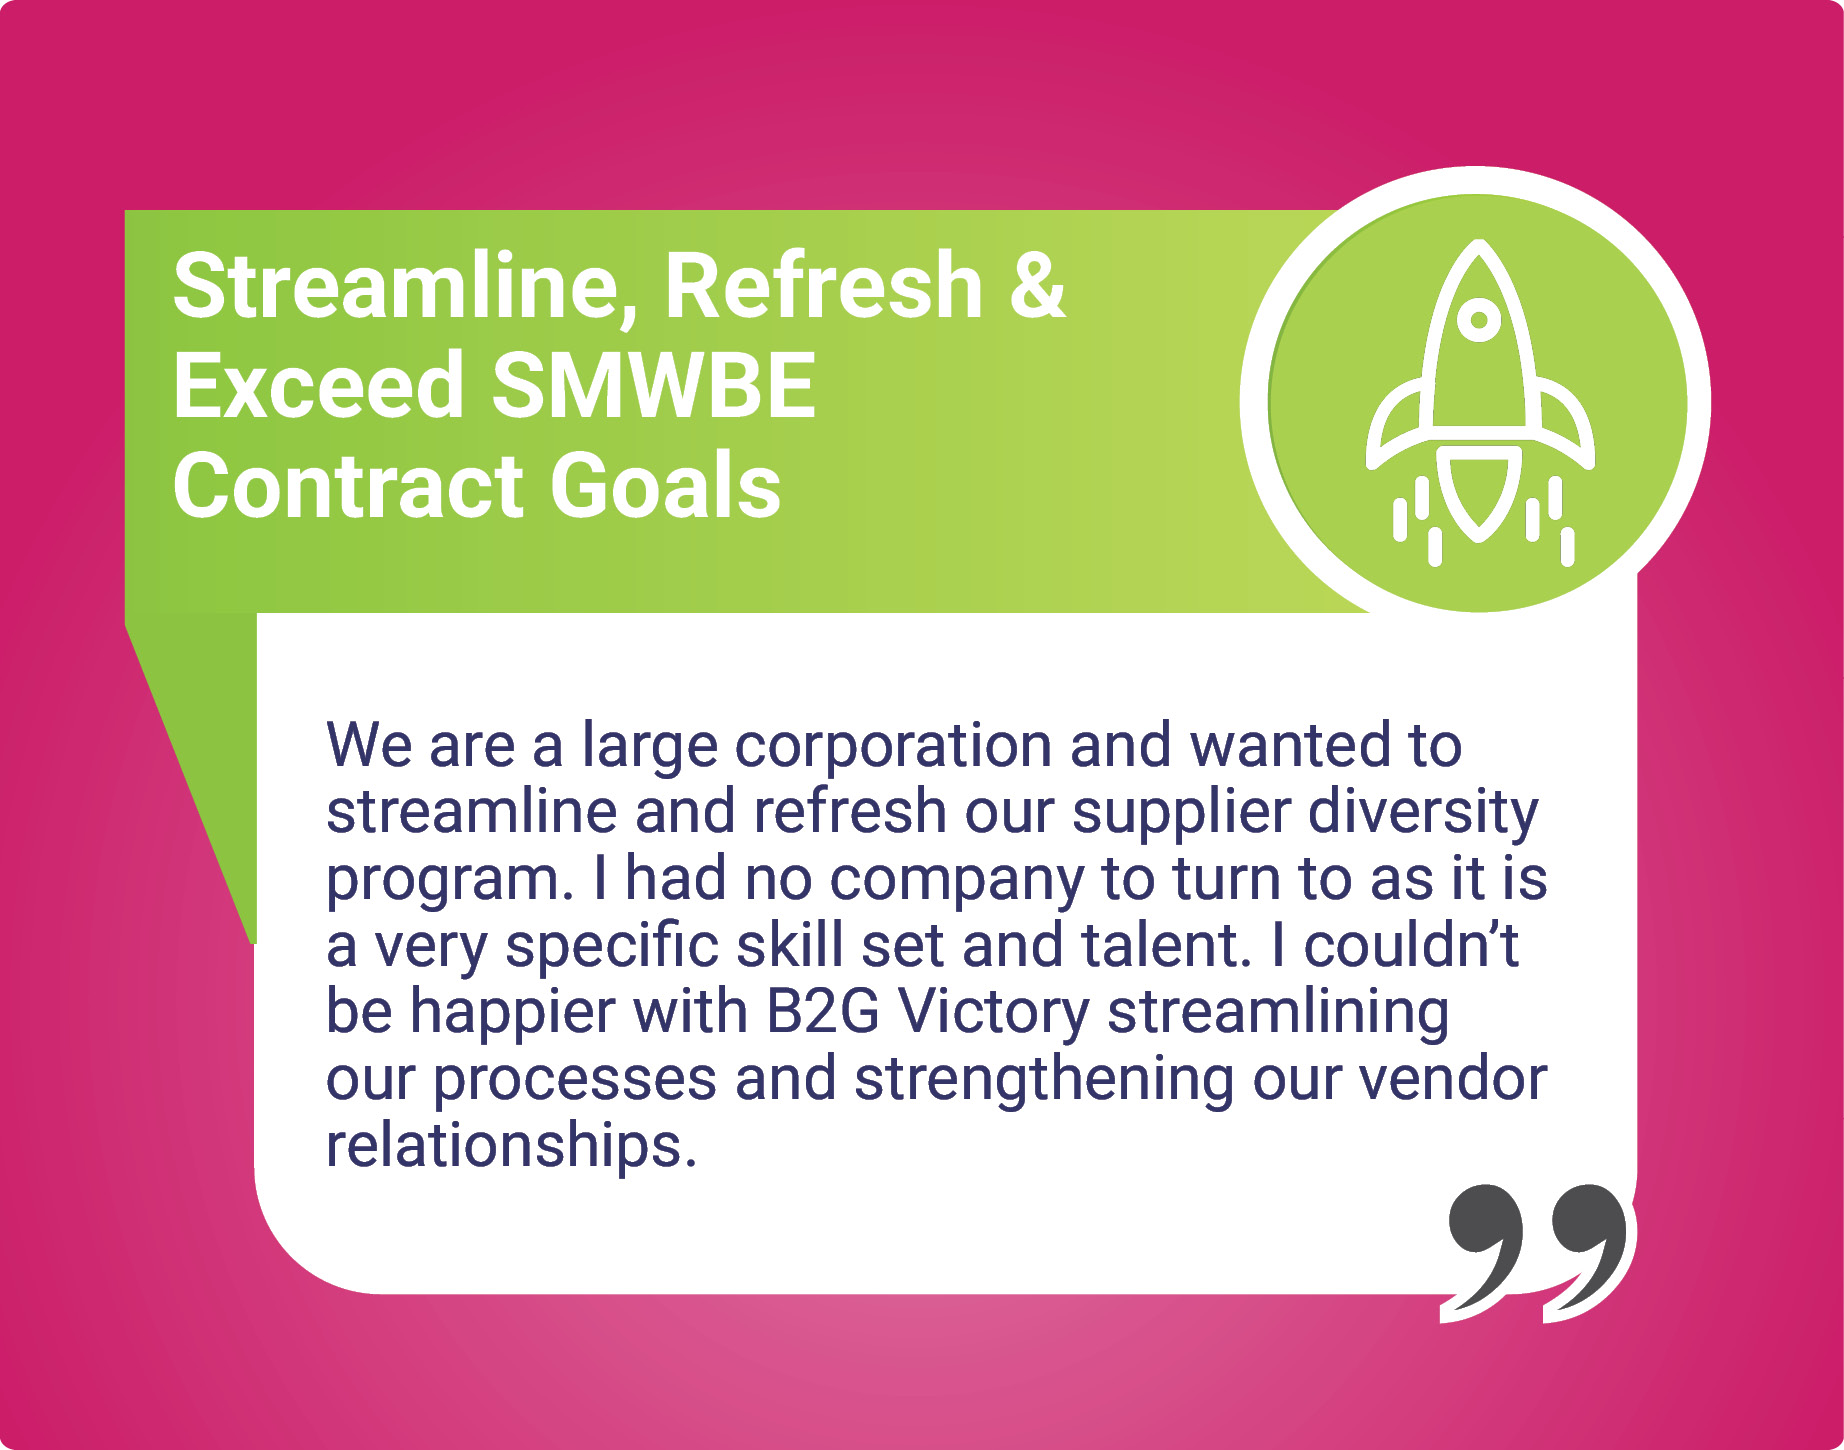 Testimonial for B2G Victory Portal about streamlining, refreshing, and exceeding SMWBE contract goals